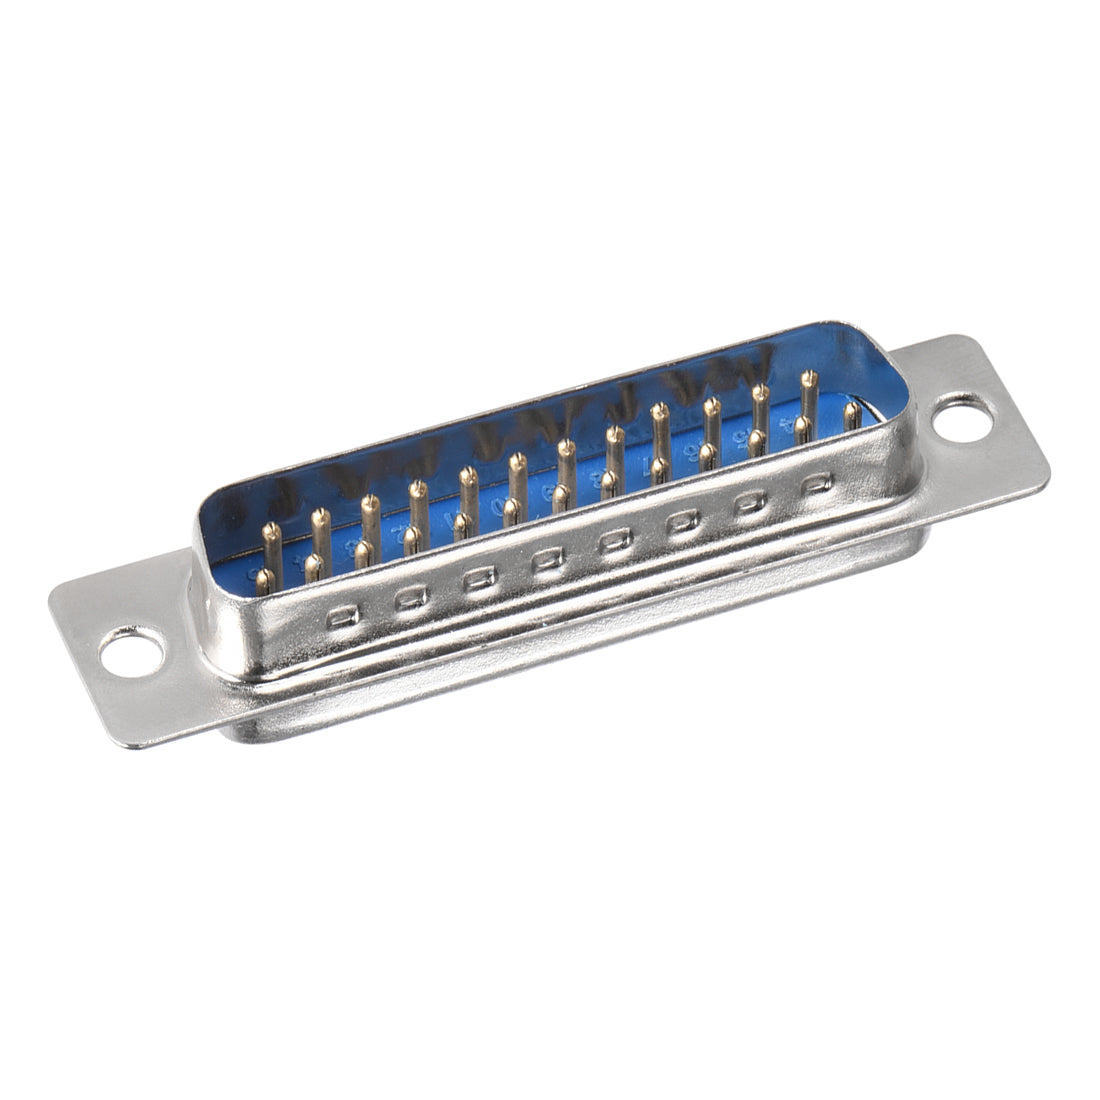 uxcell Uxcell D-sub Connector Male Plug 25-pin 2-row Port Terminal Breakout Solder Type for Mechanical Equipment CNC Computers Blue 20pcs